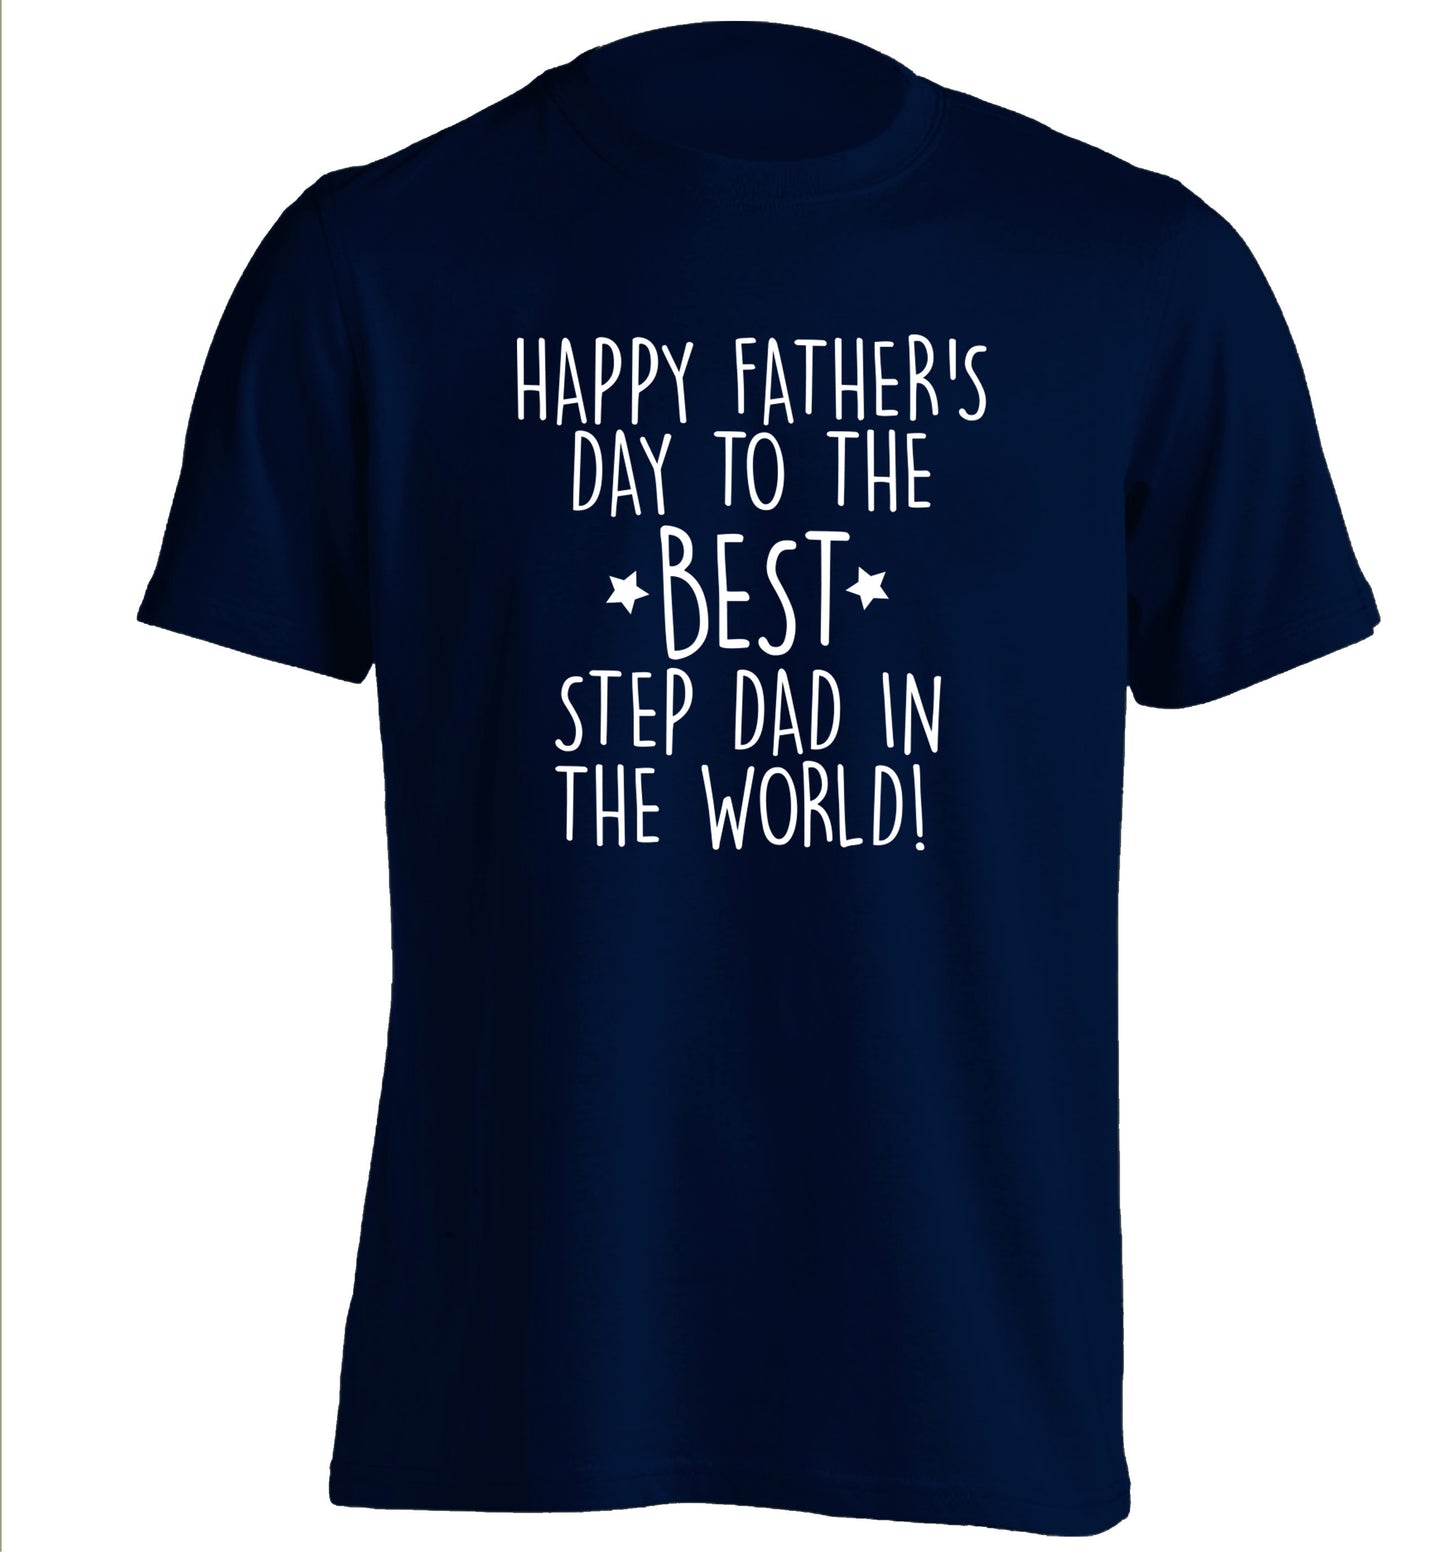 Happy Father's day to the best step dad in the world! adults unisex navy Tshirt 2XL